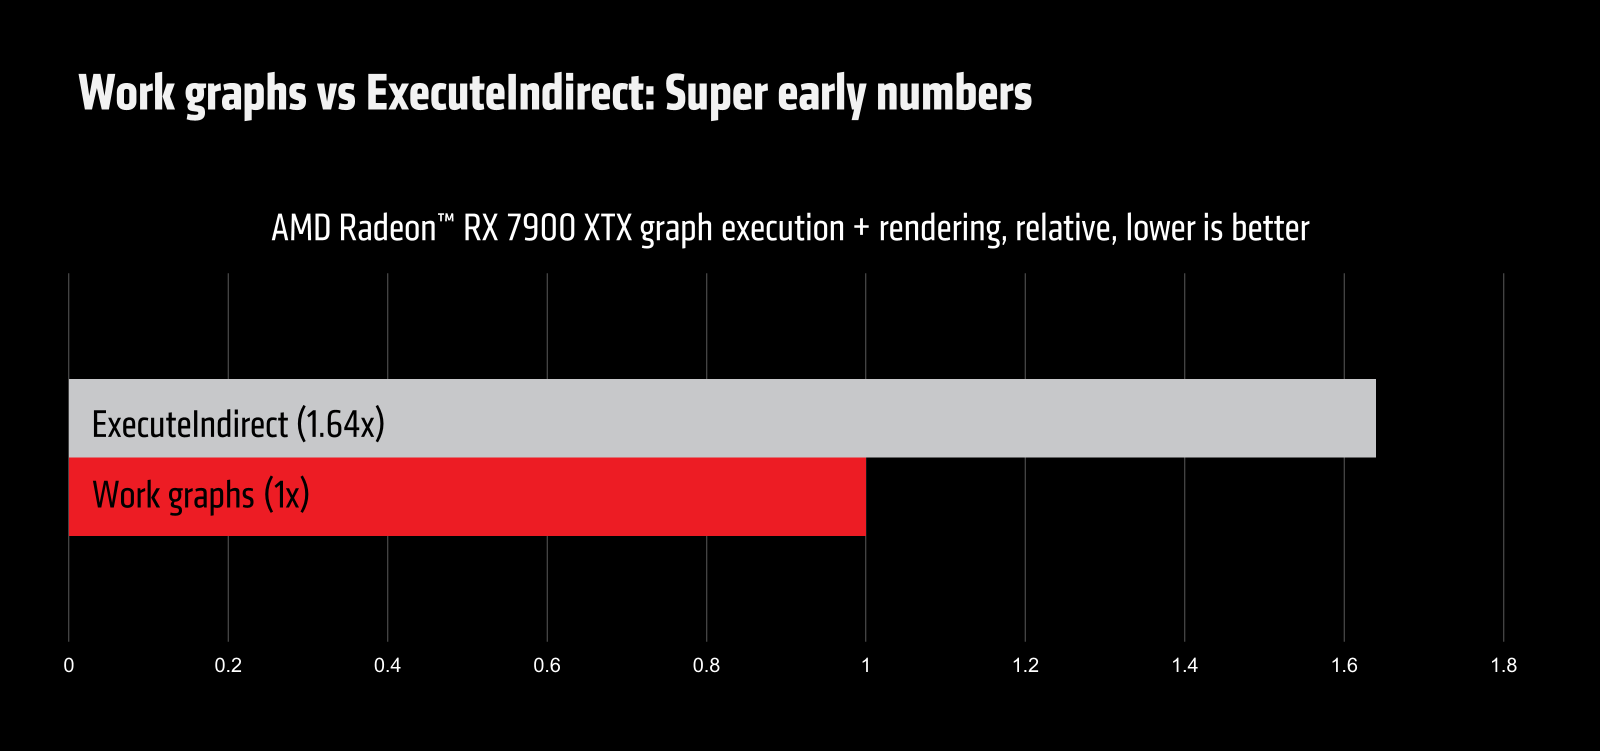 Work graphs vs ExecuteIndirect: Super early numbers. Chart showing ExecuteIndirect at 1.64x compared to Work graphs at 1x. Lower is better.